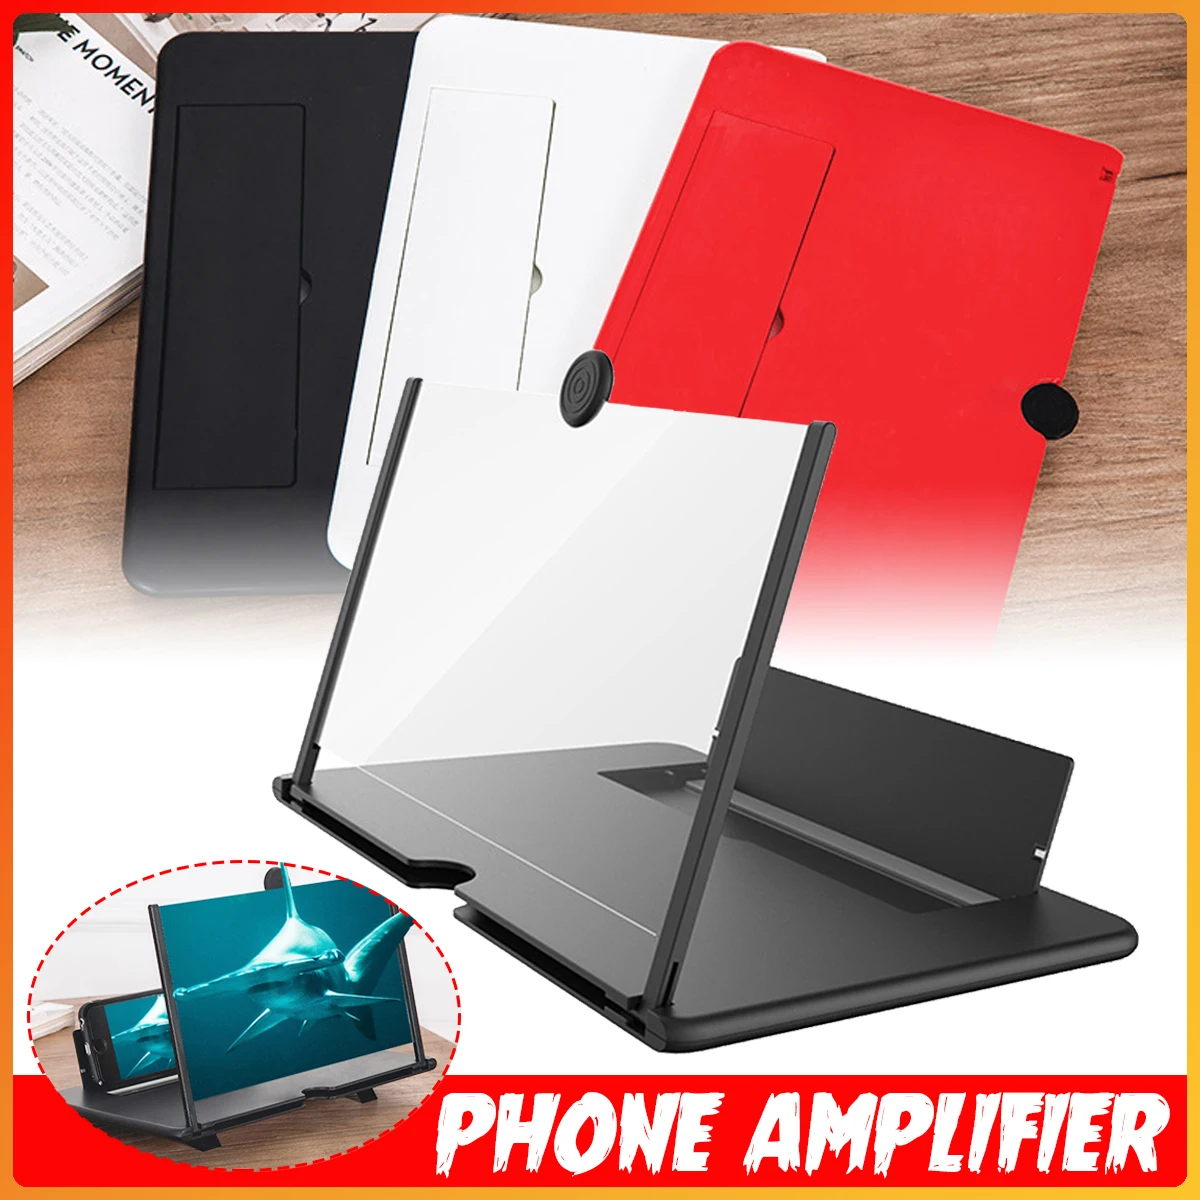 

Pull Typer Cell Phone Amplifier 3D Effect High Definition Large Screen with Desk Holder Magnifying Folding for Movie Game